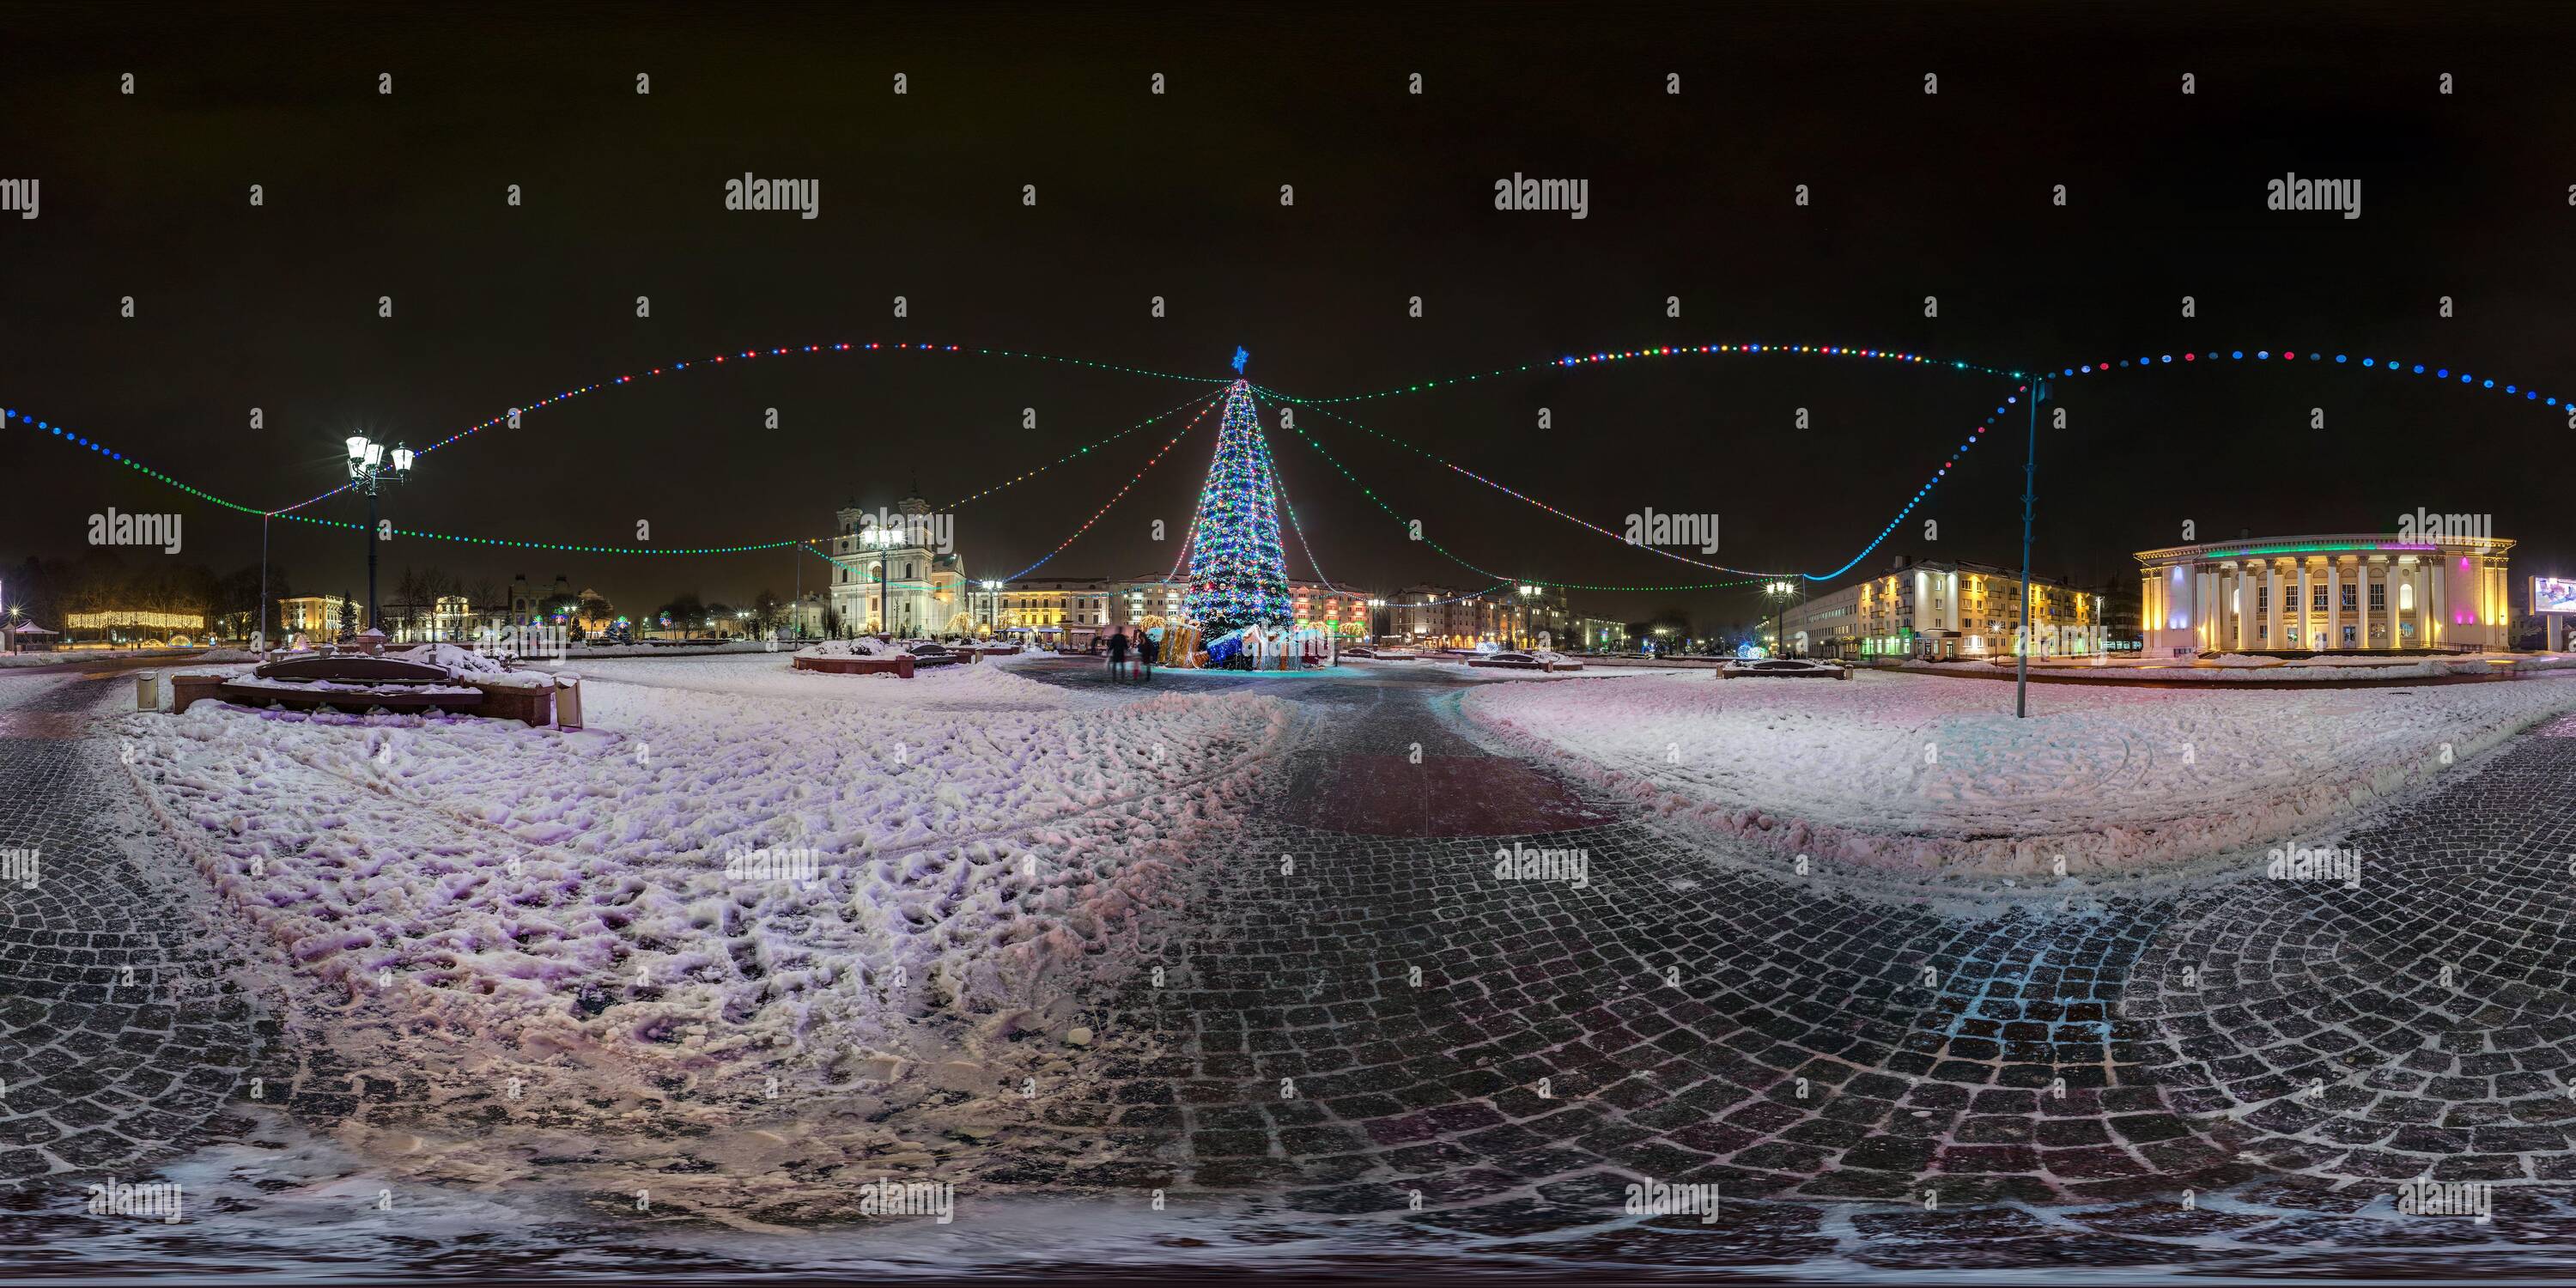 360 degree panoramic view of GRODNO, BELARUS - DECEMBER 2018: Full seamless night hdri panorama 360 degrees angle view on night Square with Christmas tree on new Year in equirecta